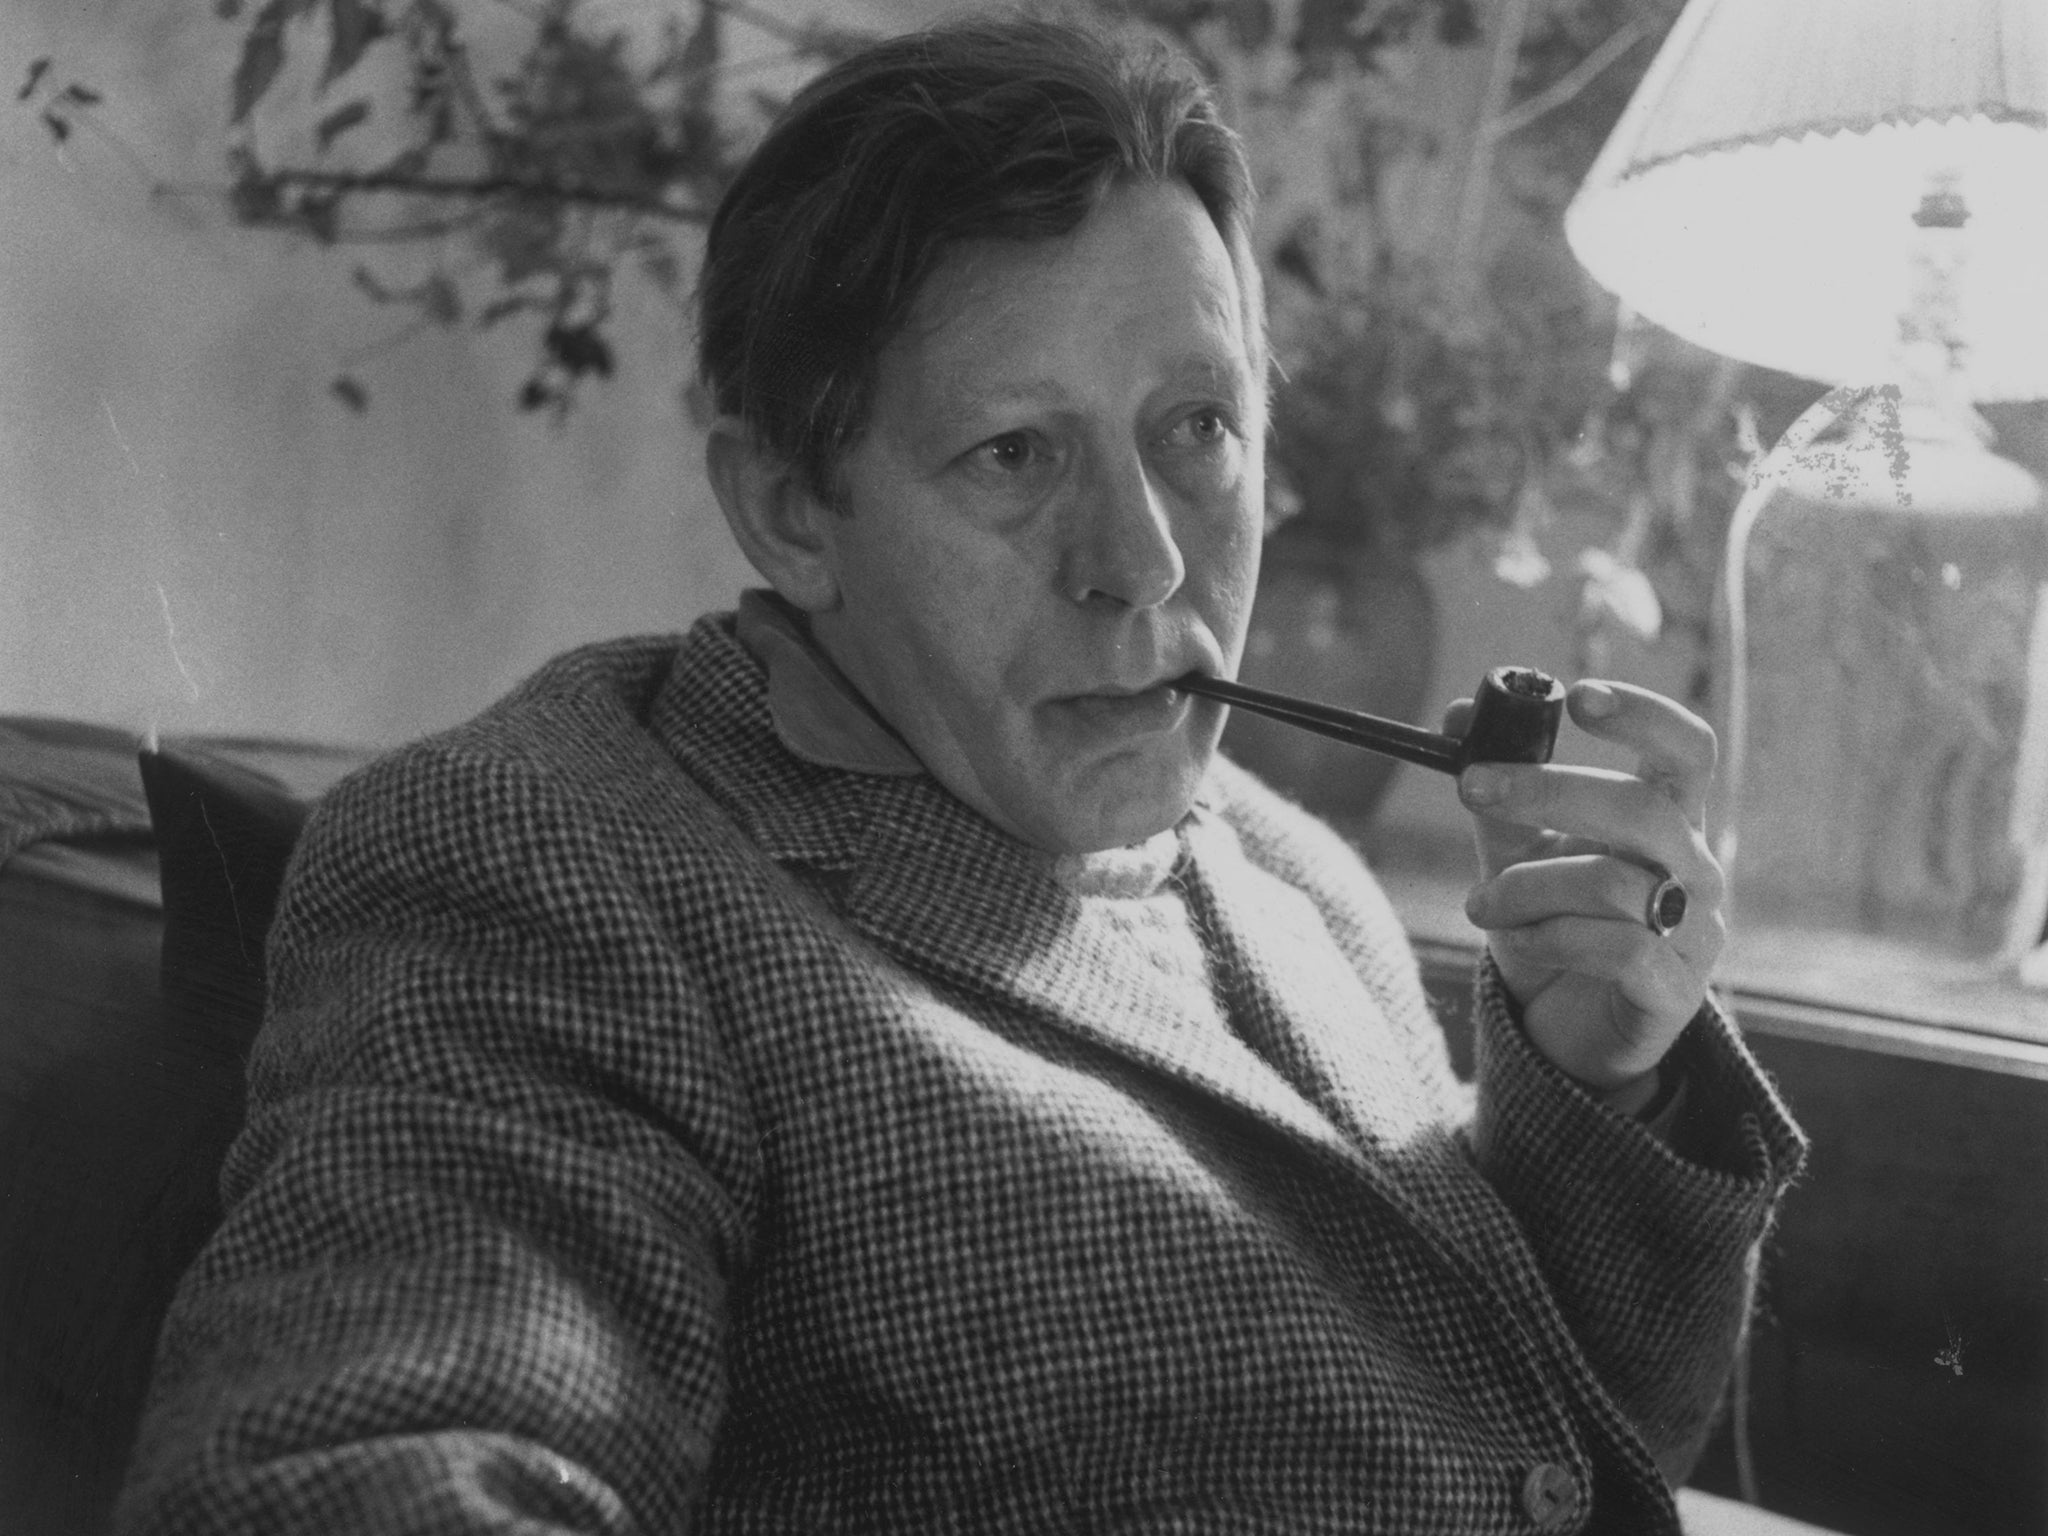 English poet and author Laurie Lee